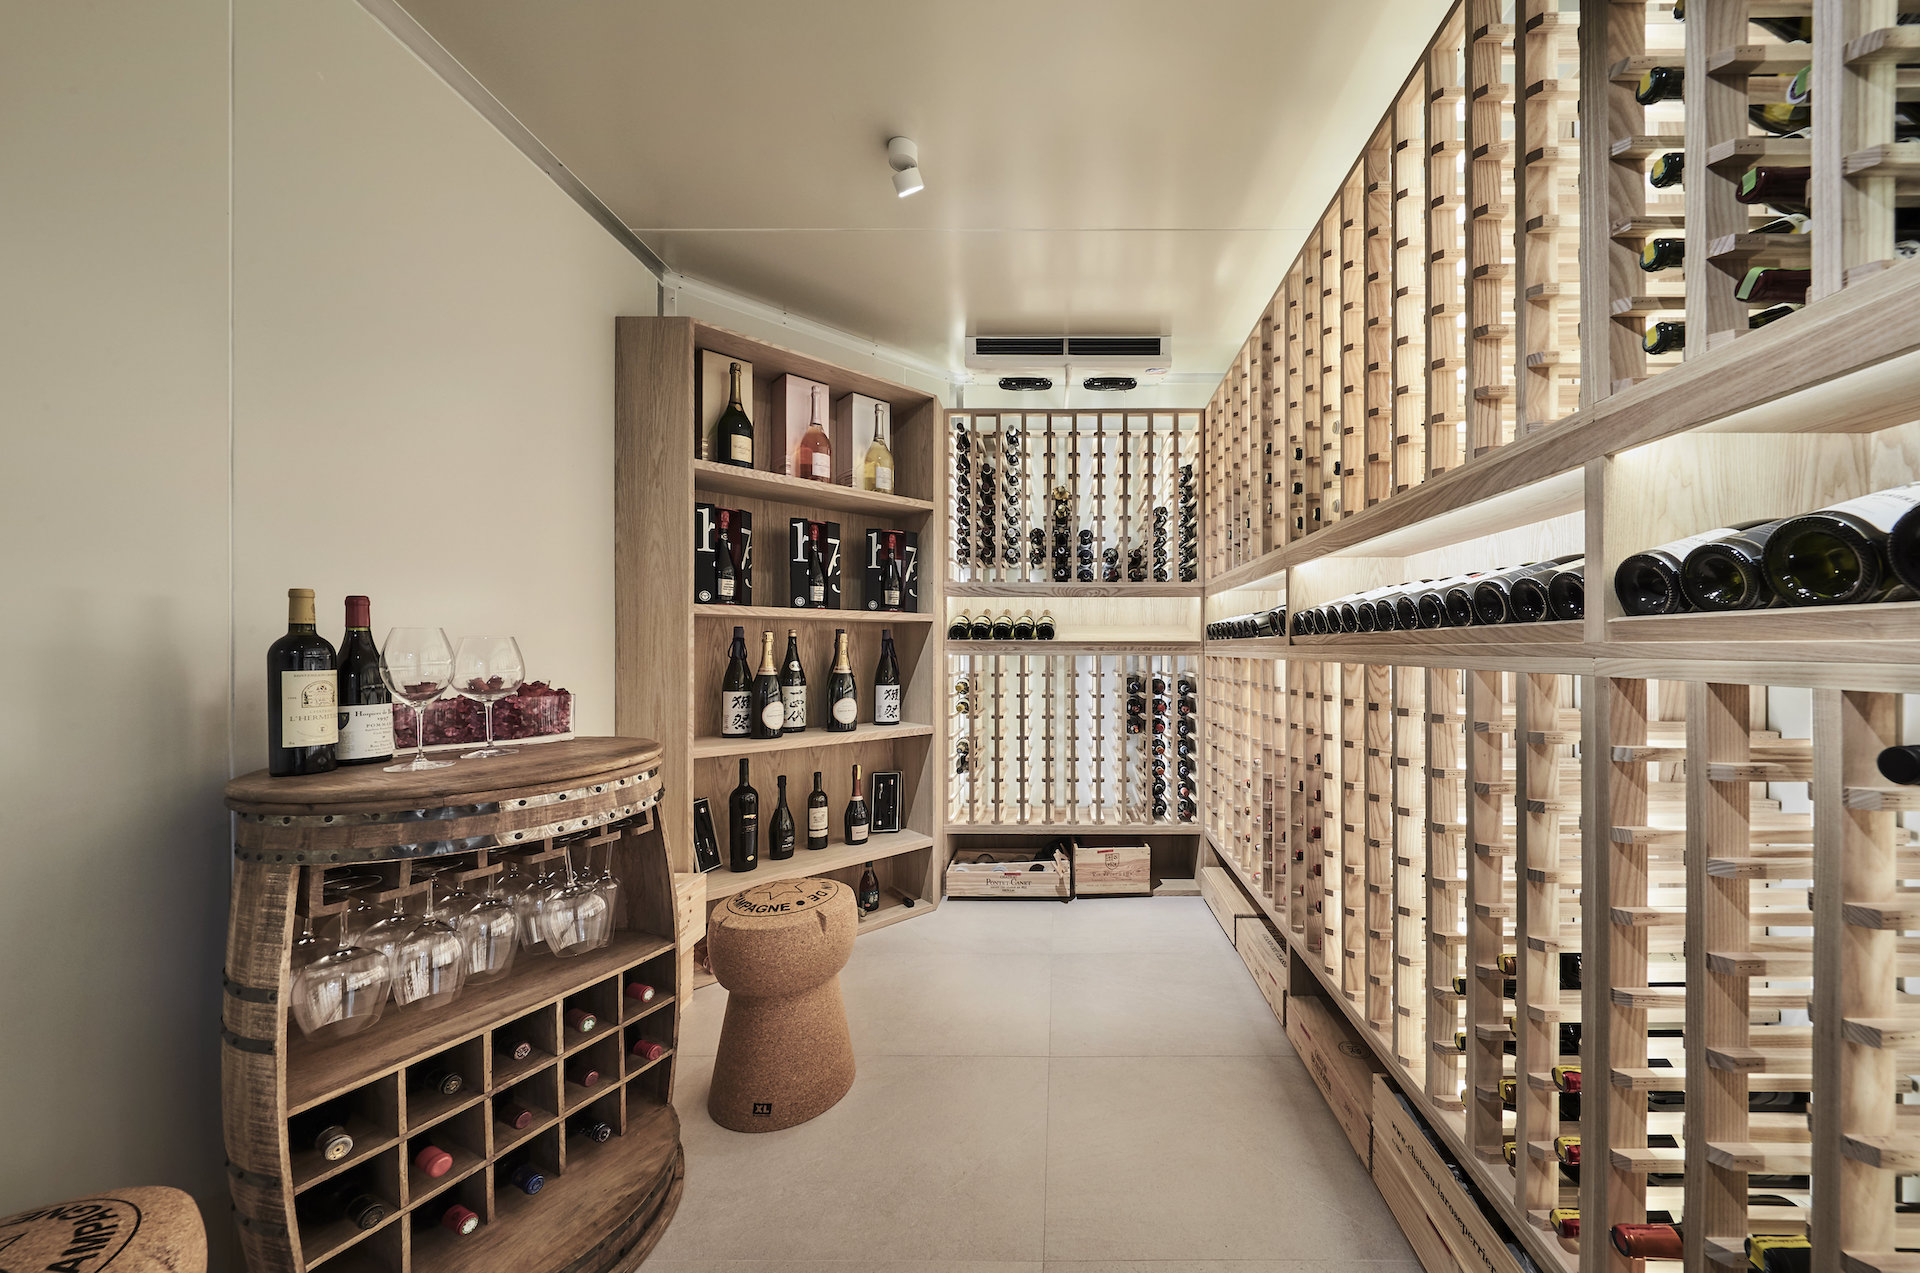 A wine cellar with wooden shelves and bottles.